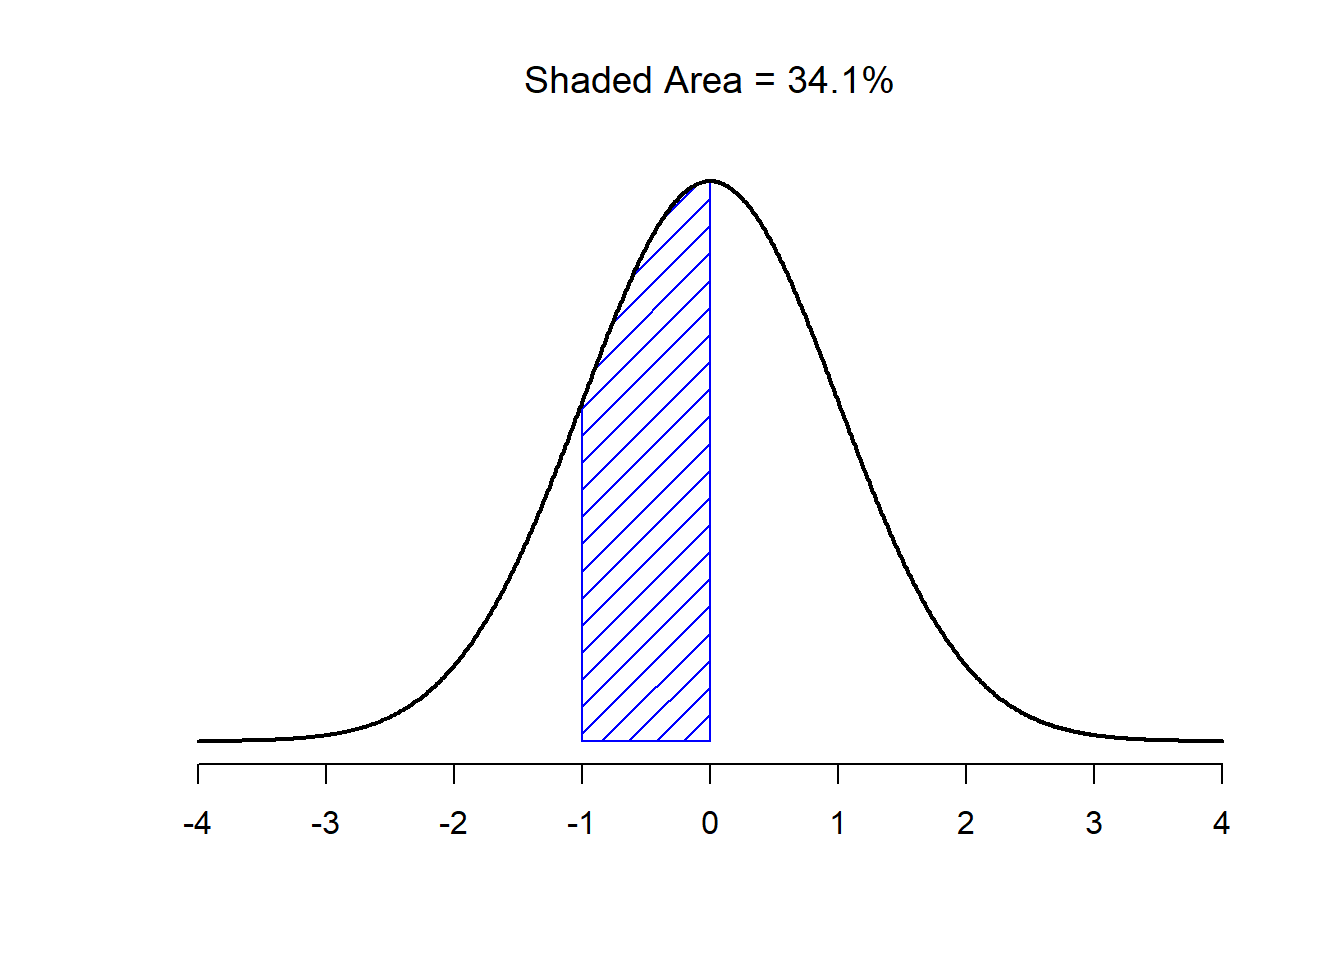 There is a 34.1% chance that the observation is greater than one standard deviation below the mean but still below the mean. Notice that if you add these two numbers together you get $15.9 + 34.1 = 50$. For normally distributed data, there is a 50% chance that an observation falls below the mean. And of course that also implies that there is a 50% chance that it falls above the mean.